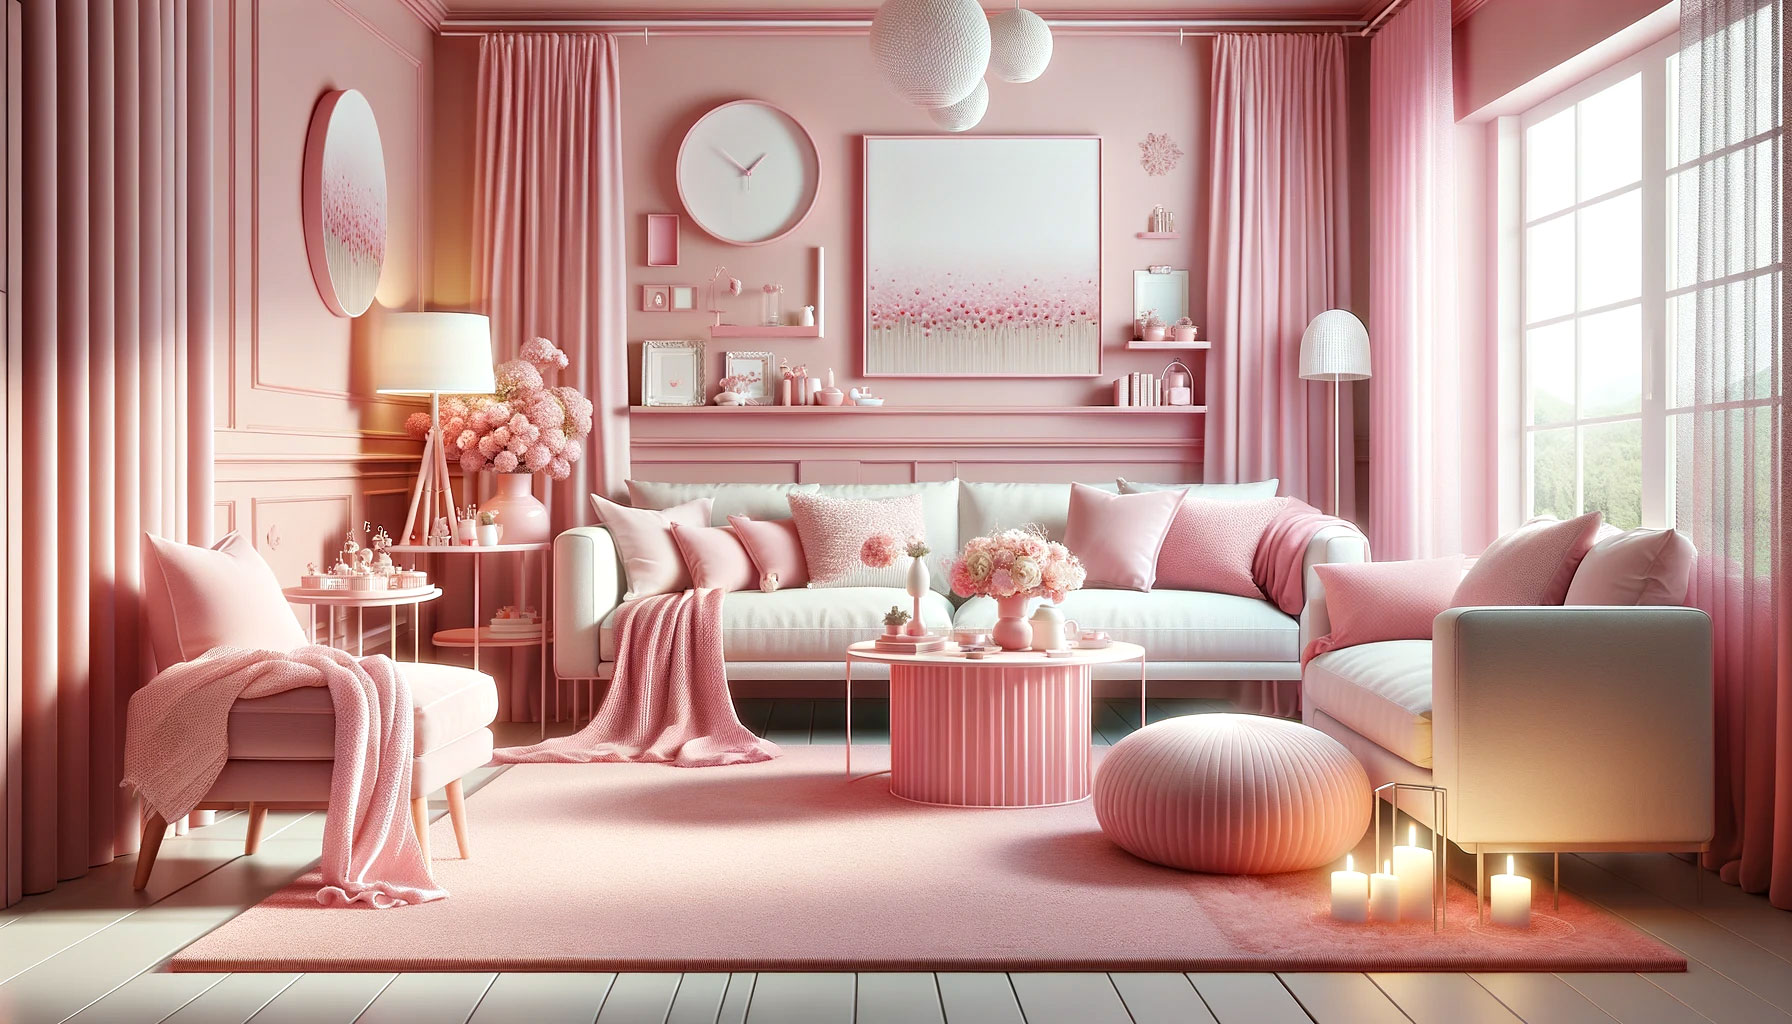 The Colour Psychology of Pink in Interior Design